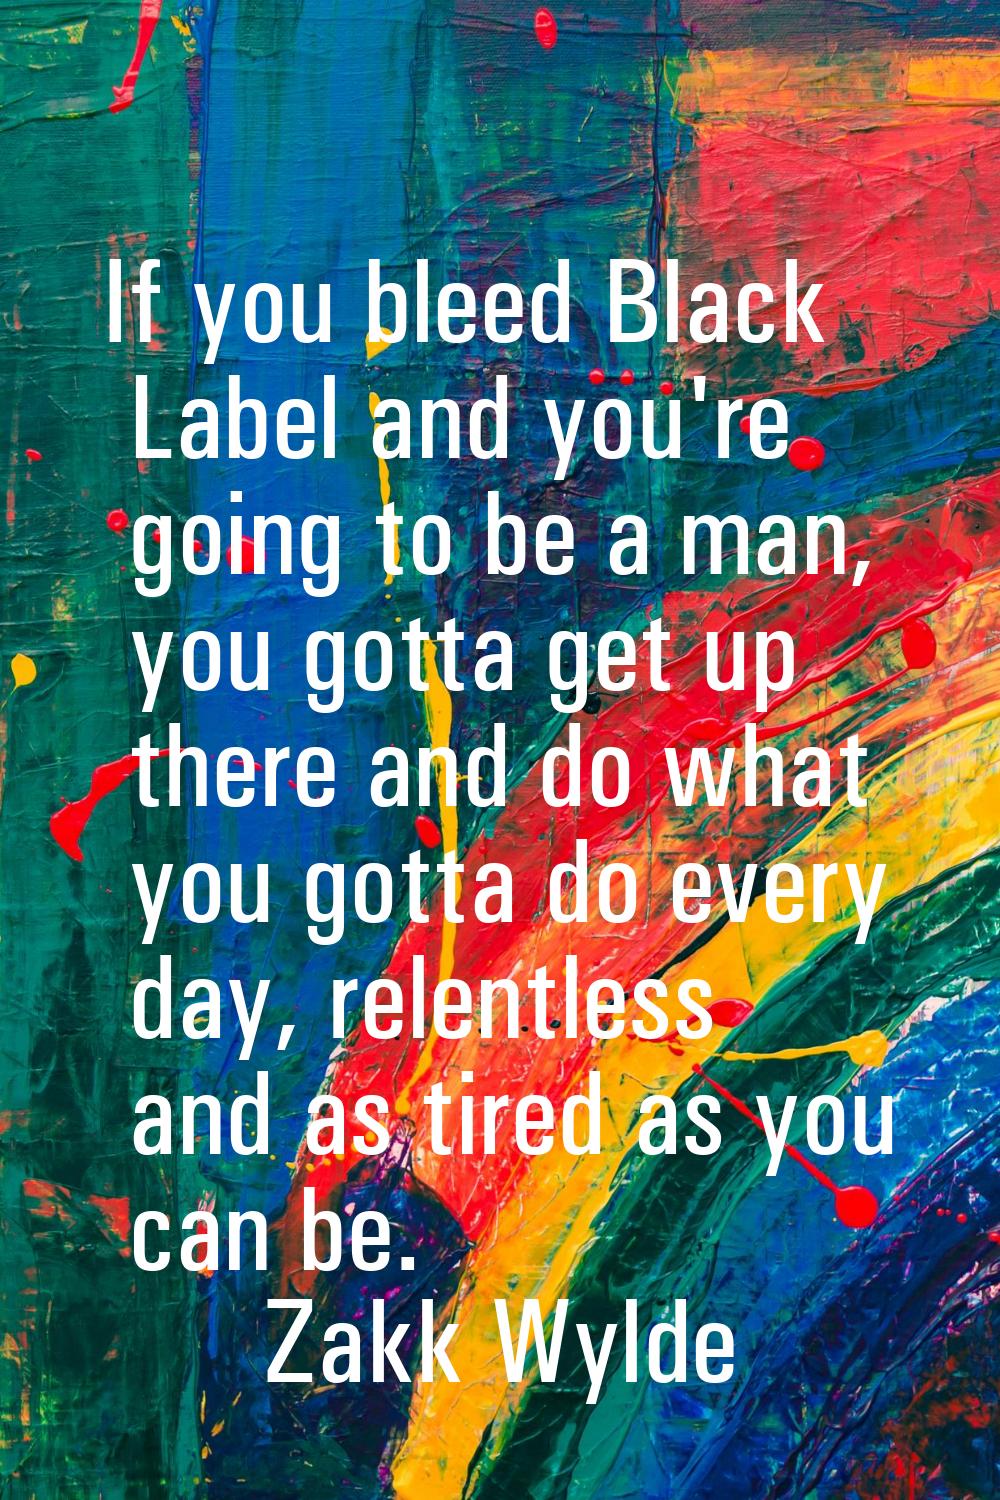 If you bleed Black Label and you're going to be a man, you gotta get up there and do what you gotta